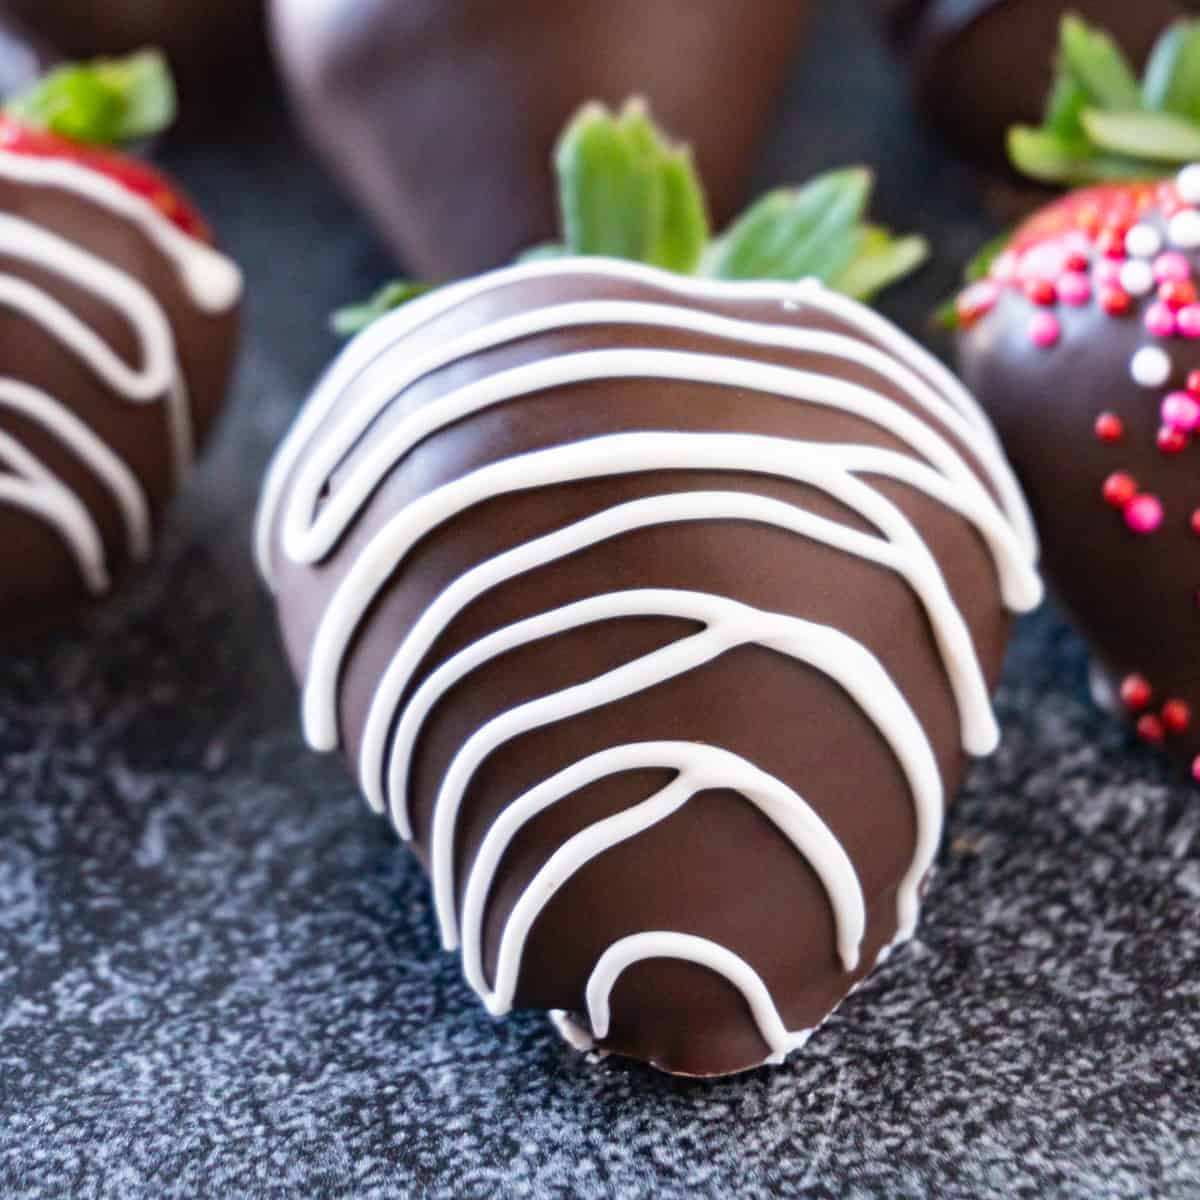 easy chocolate covered strawberries featured image